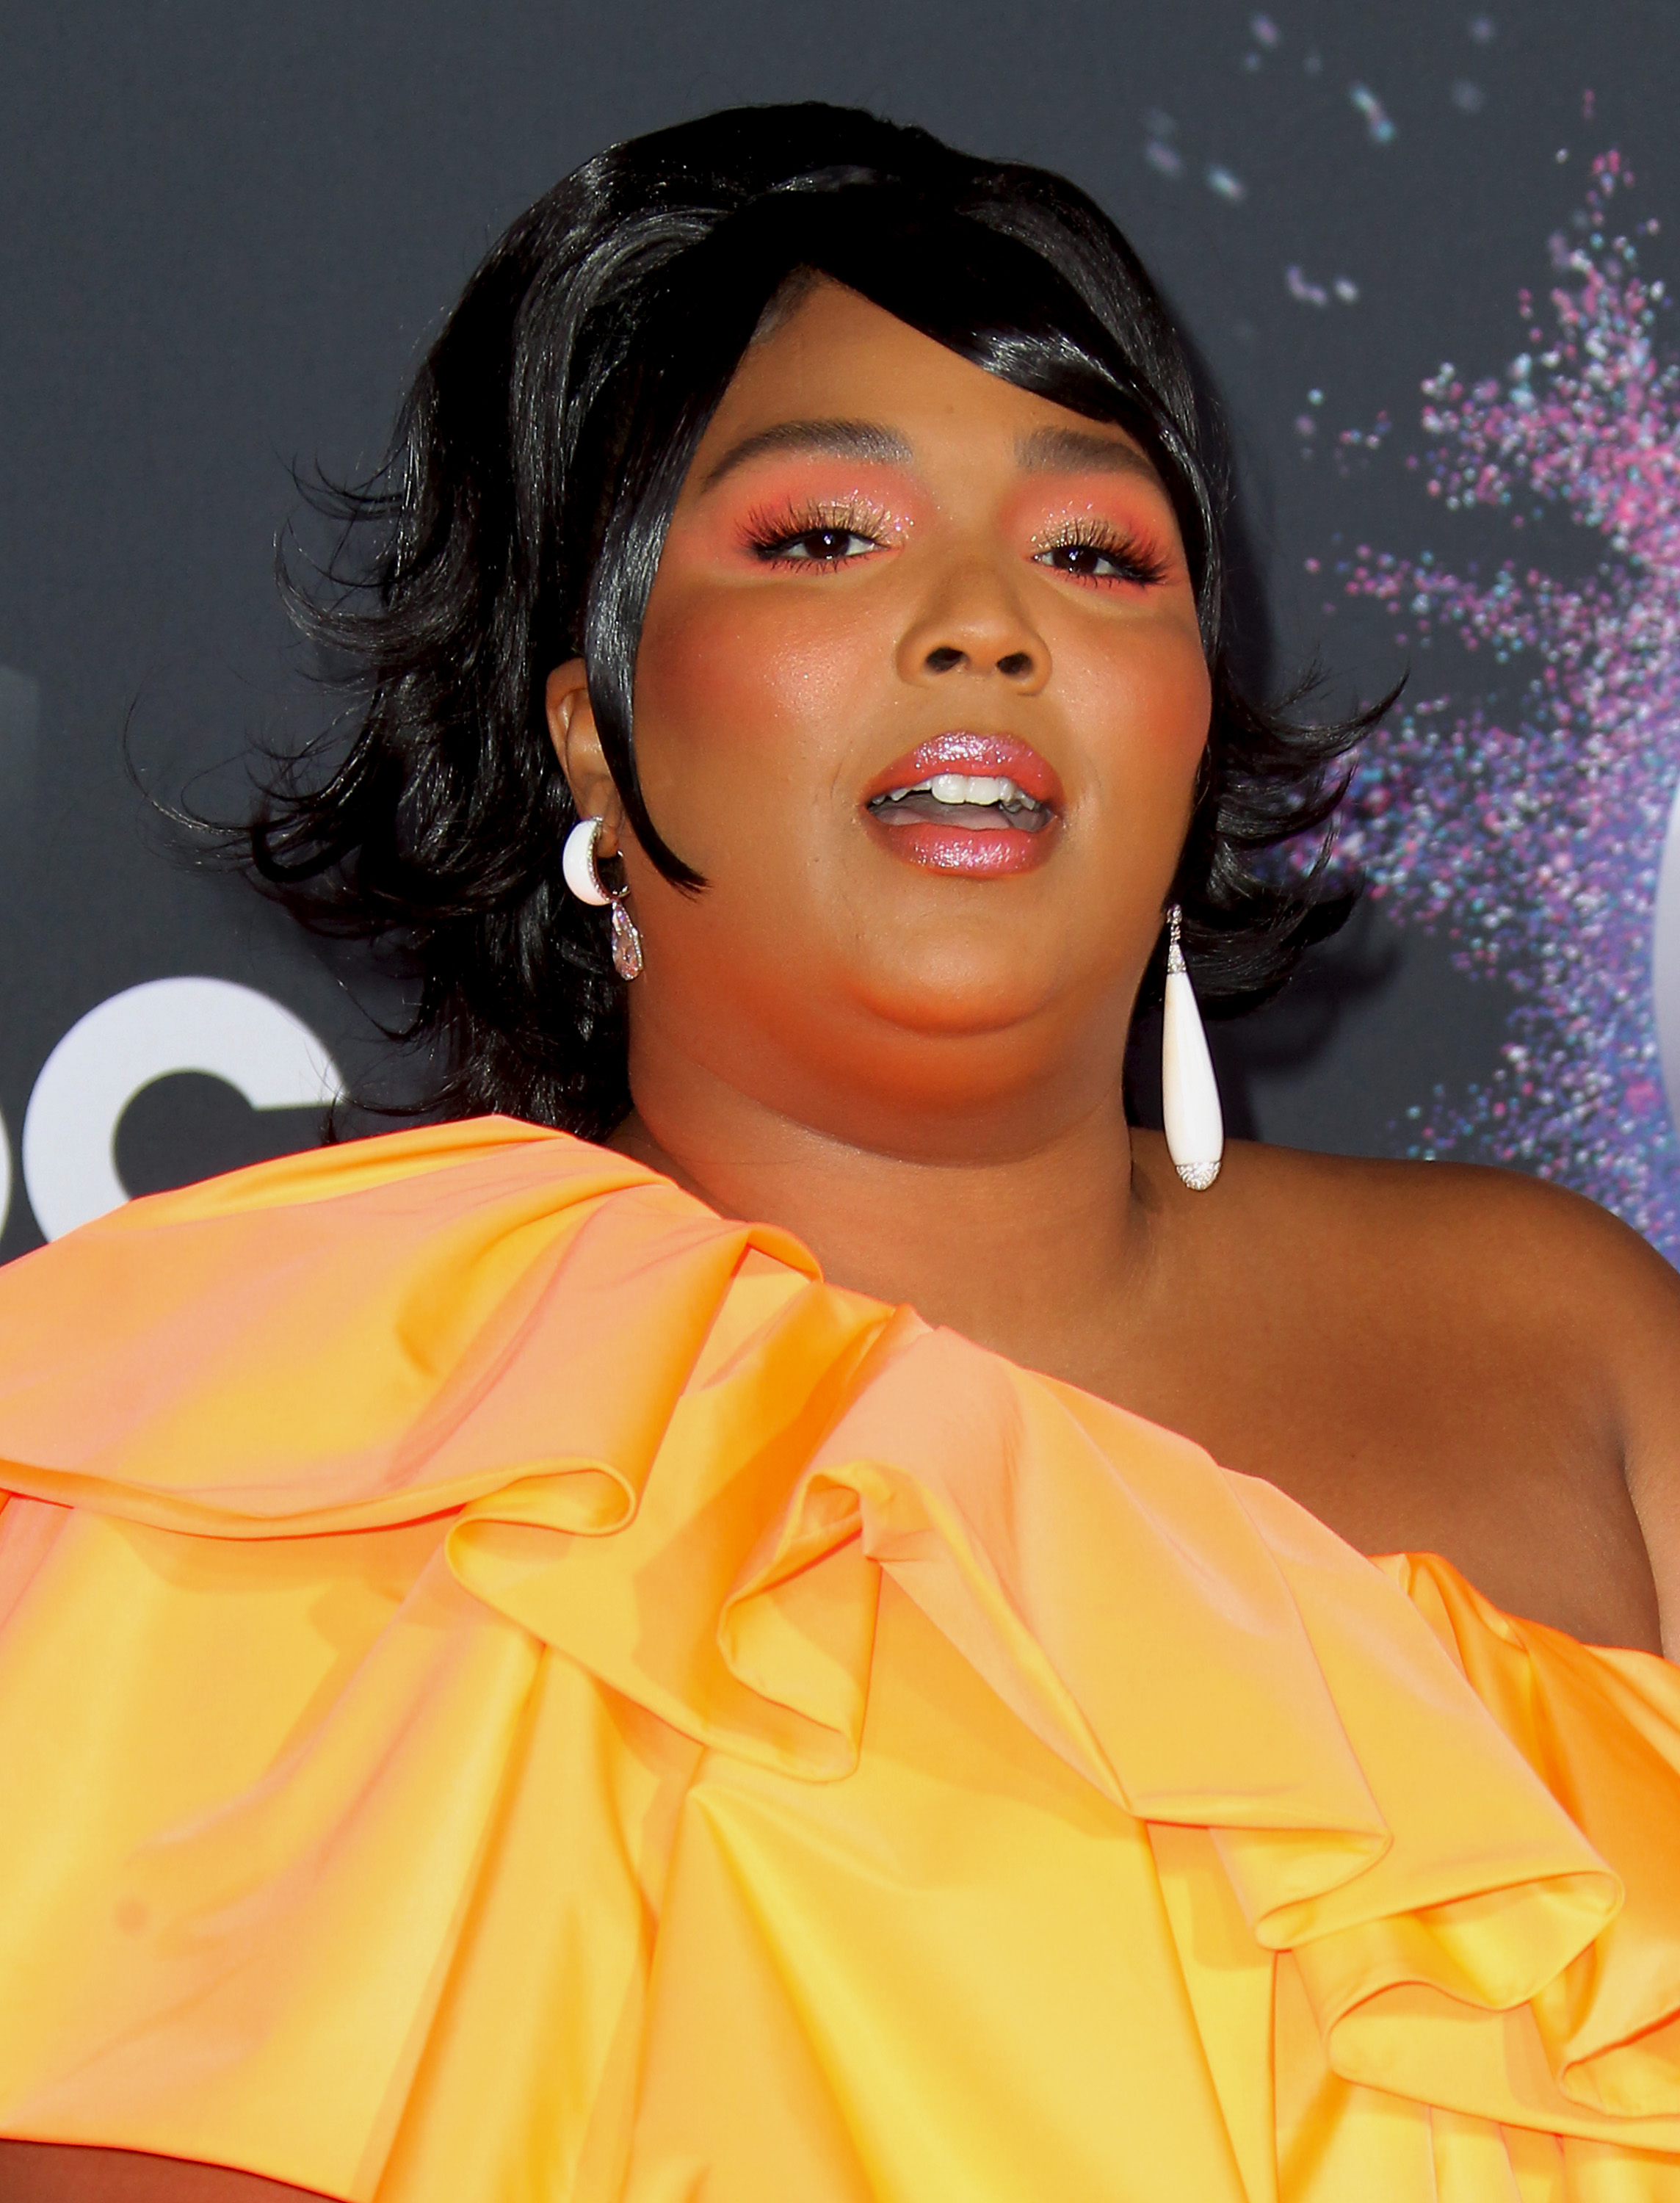 Fashion, Shopping & Style | Lizzo Says She Has 